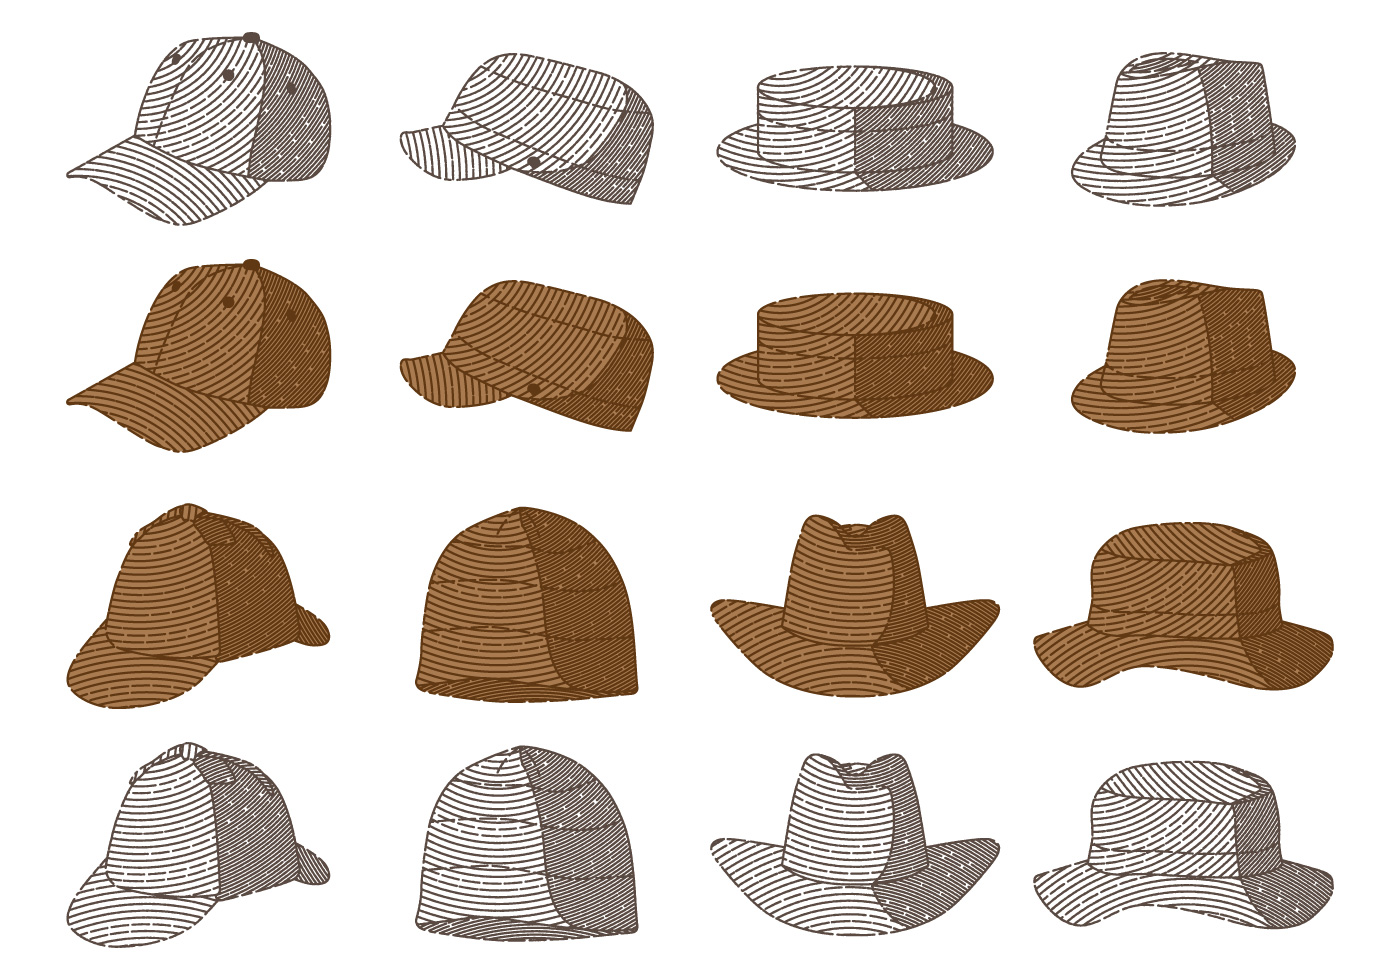 Vintage hat collection hand drawn engraving style black and white